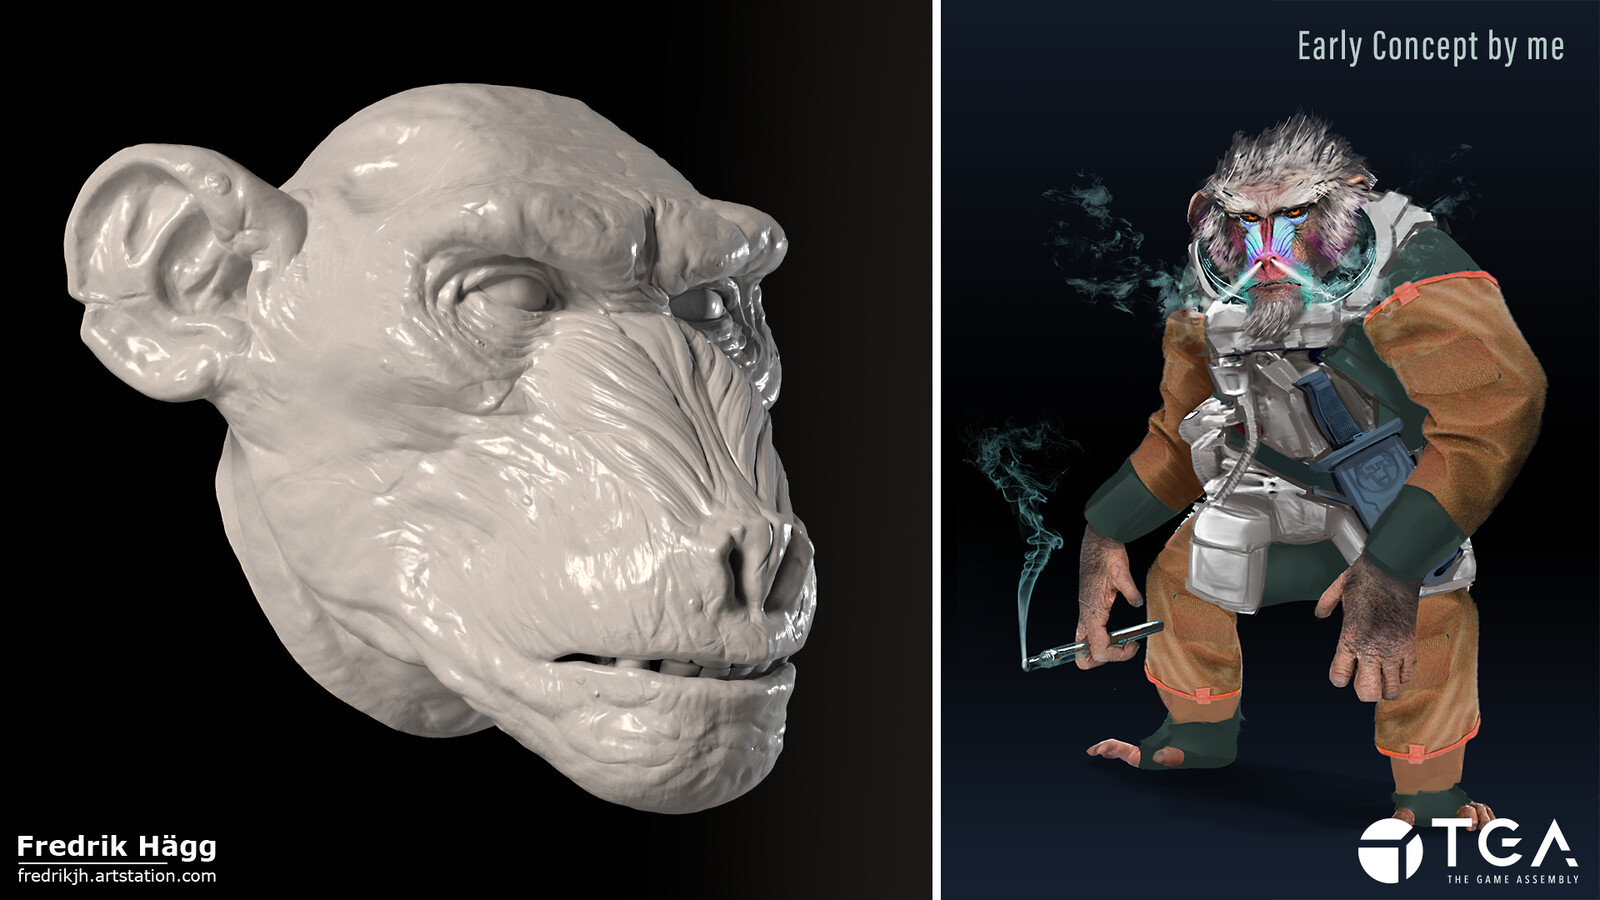 ZBrush sculpting of the head was done over approxemately 30 work hours.

The Space Ape concept was bashed during a Sketch-and-Fika morning session. He loves smokes &amp; hates space. He's half-man, half-chimp, half-mandrill and all grumpy.